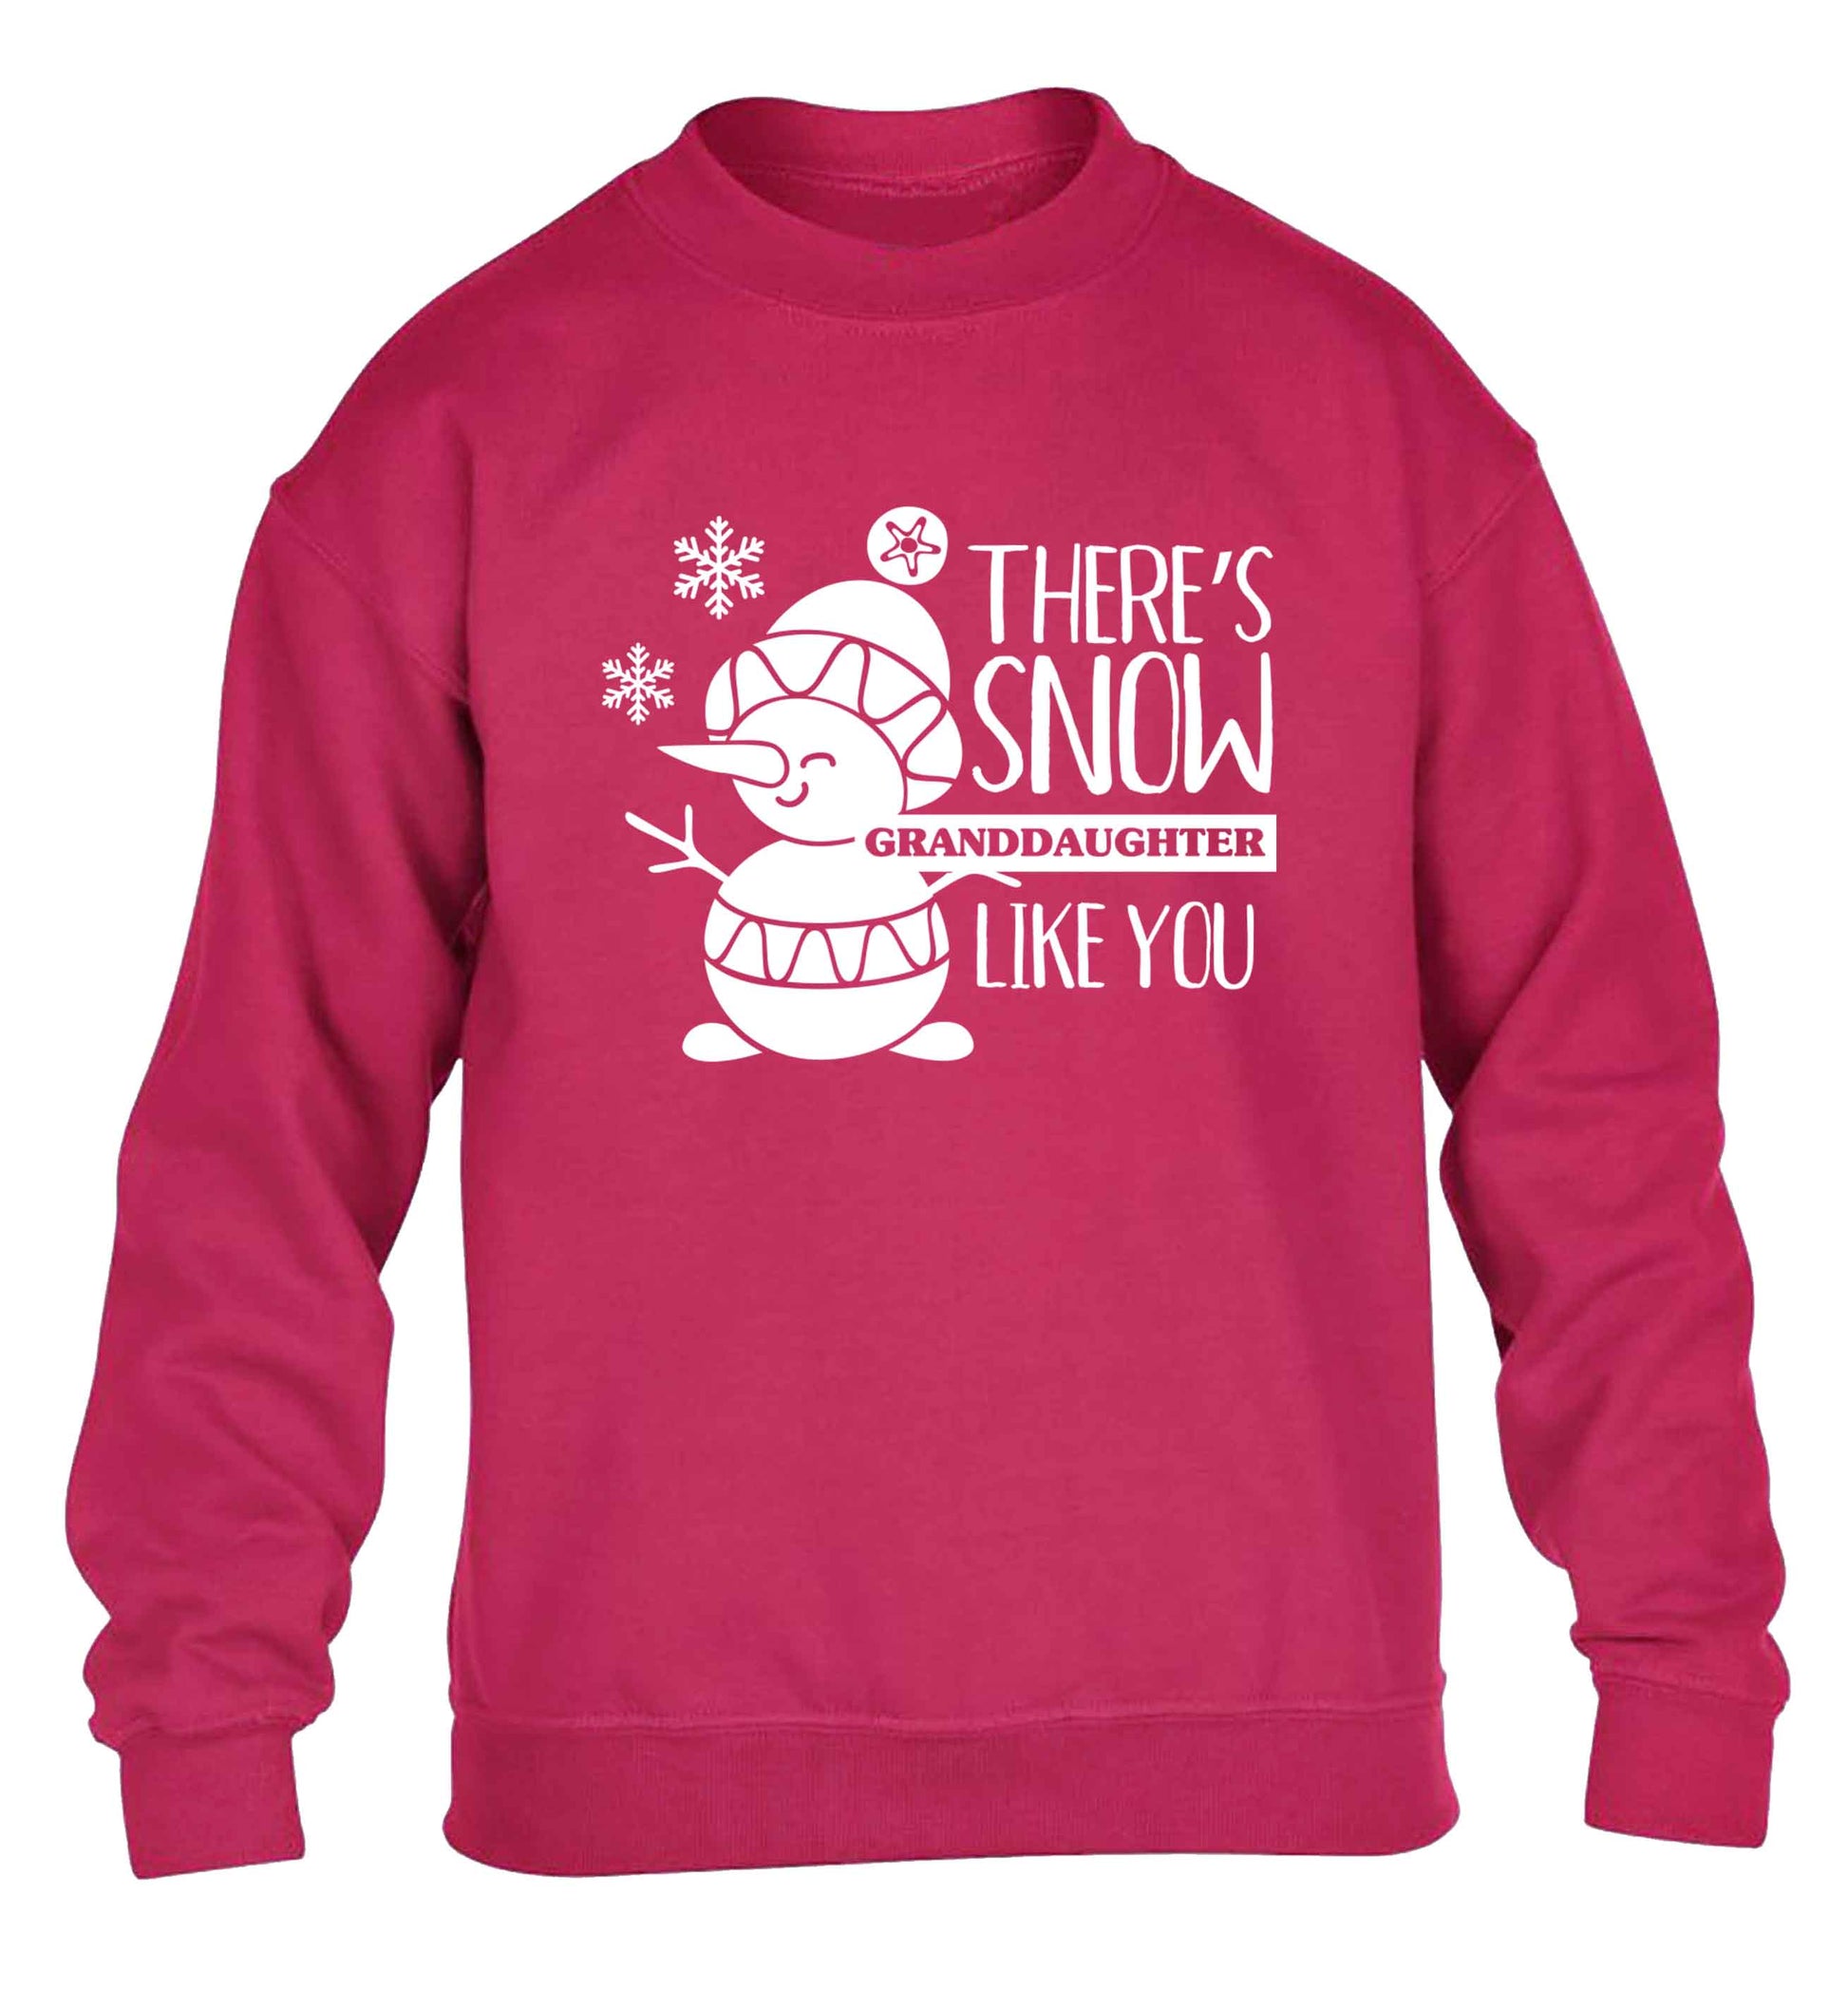 There's snow granddaughter like you children's pink sweater 12-13 Years